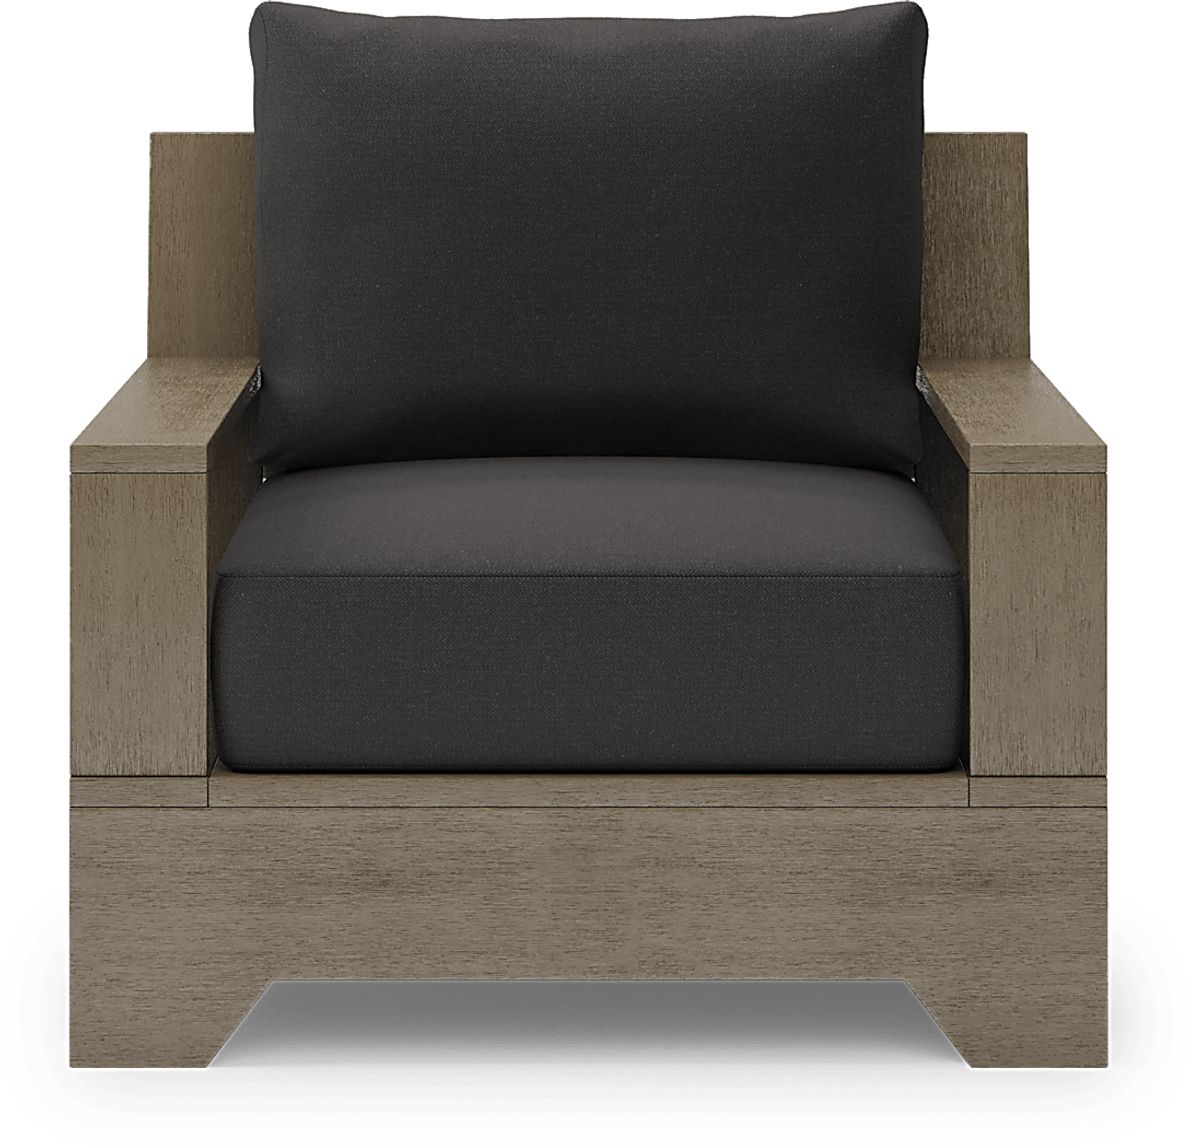 Cindy Crawford Home Lake Tahoe Gray Outdoor Club Chair with Charcoal Cushions